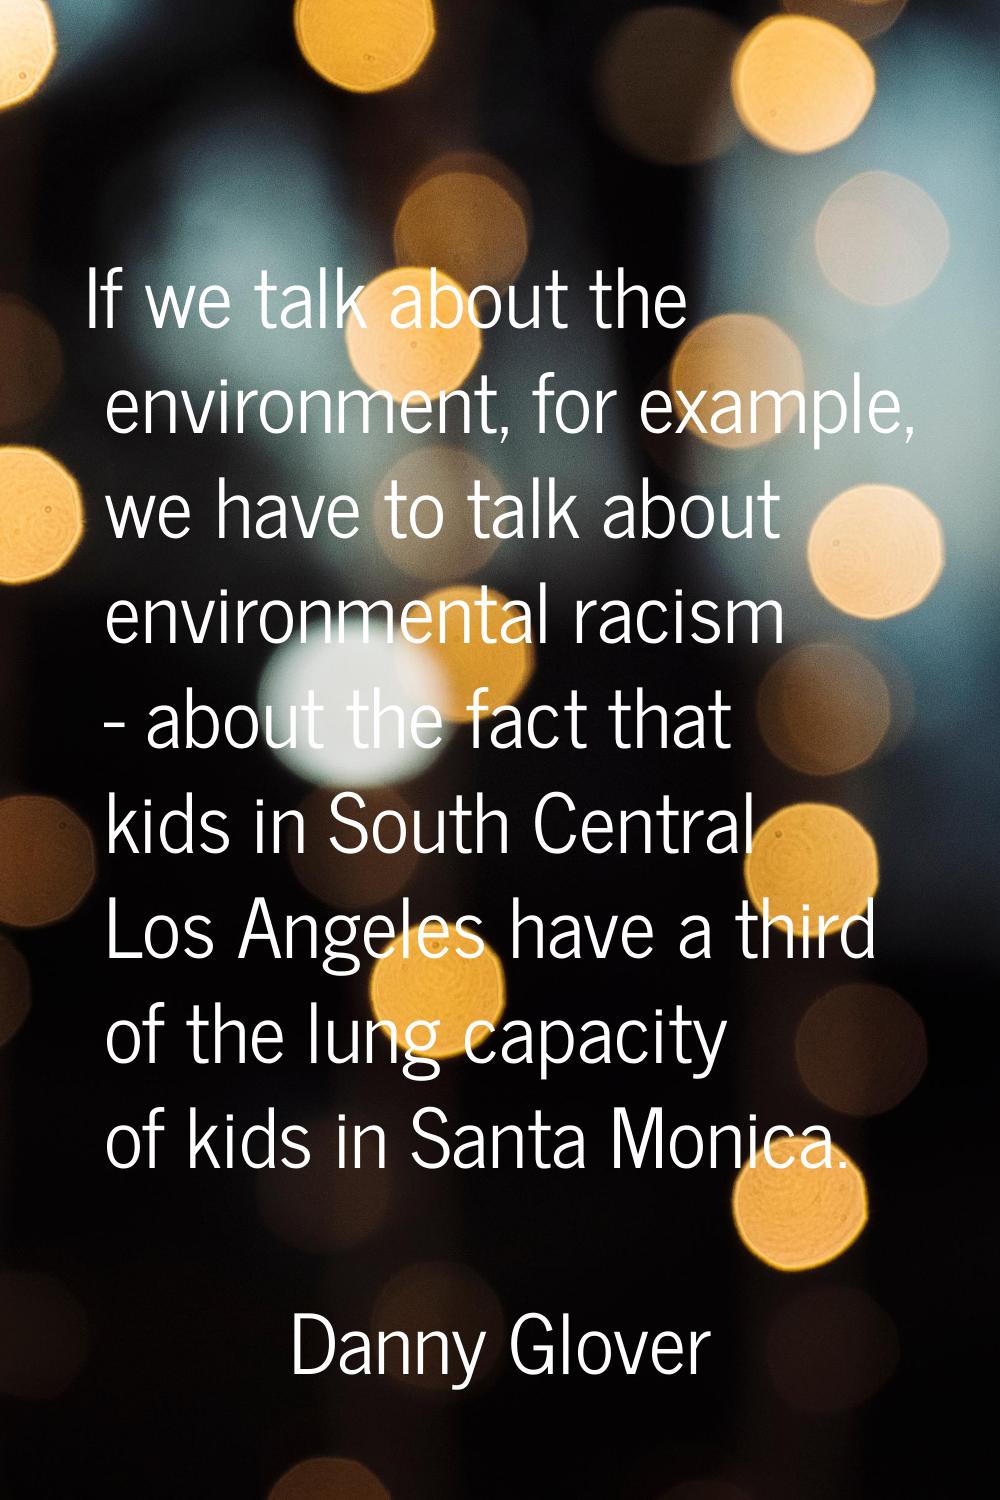 If we talk about the environment, for example, we have to talk about environmental racism - about t